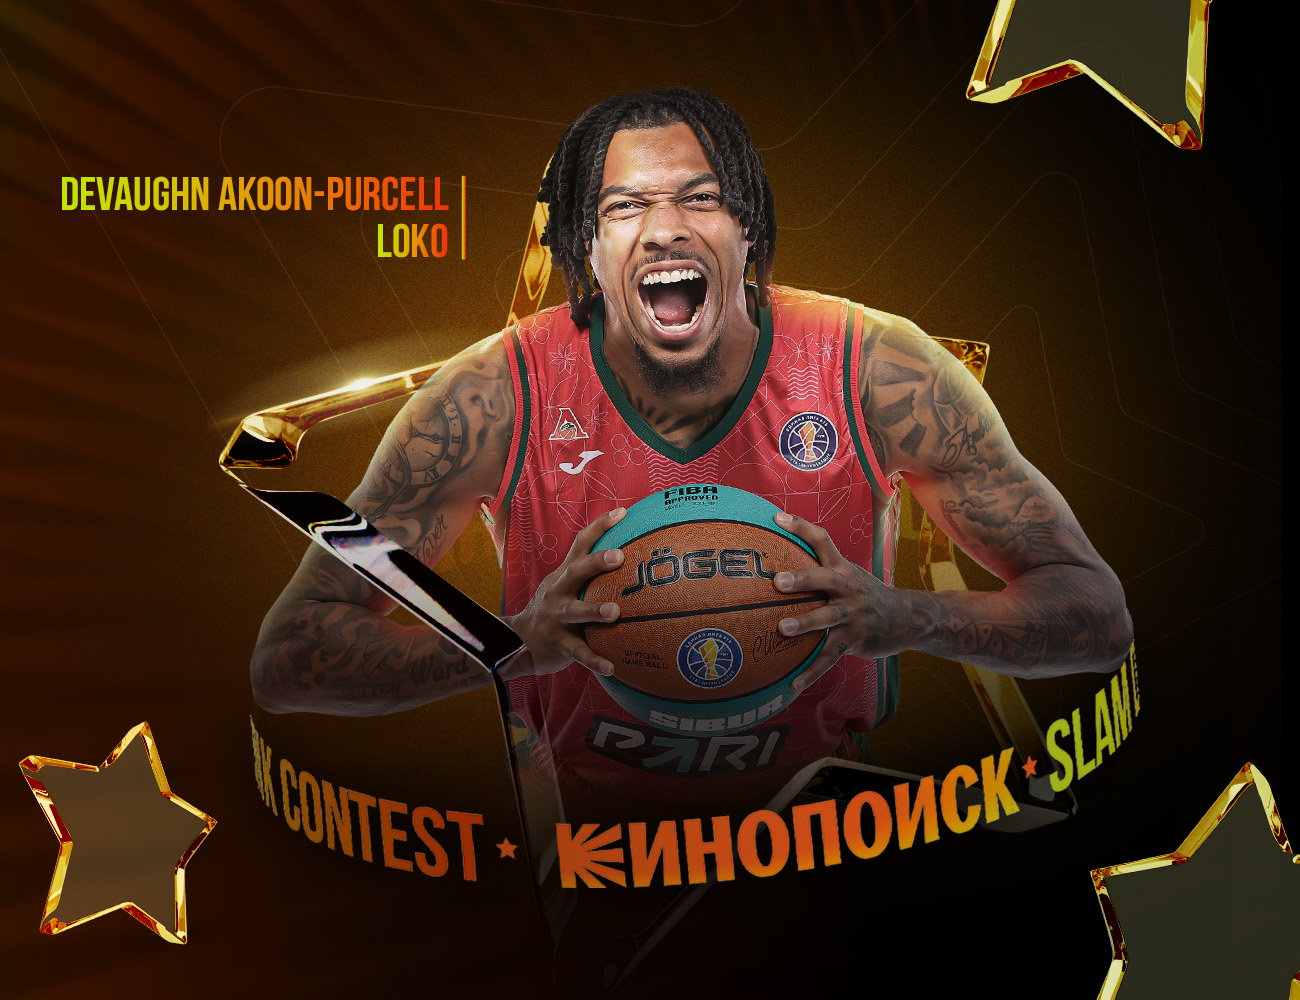 DeVaughn Akoon-Purcell is the third participant of the KINOPOISK SLAM-DUNK CONTEST